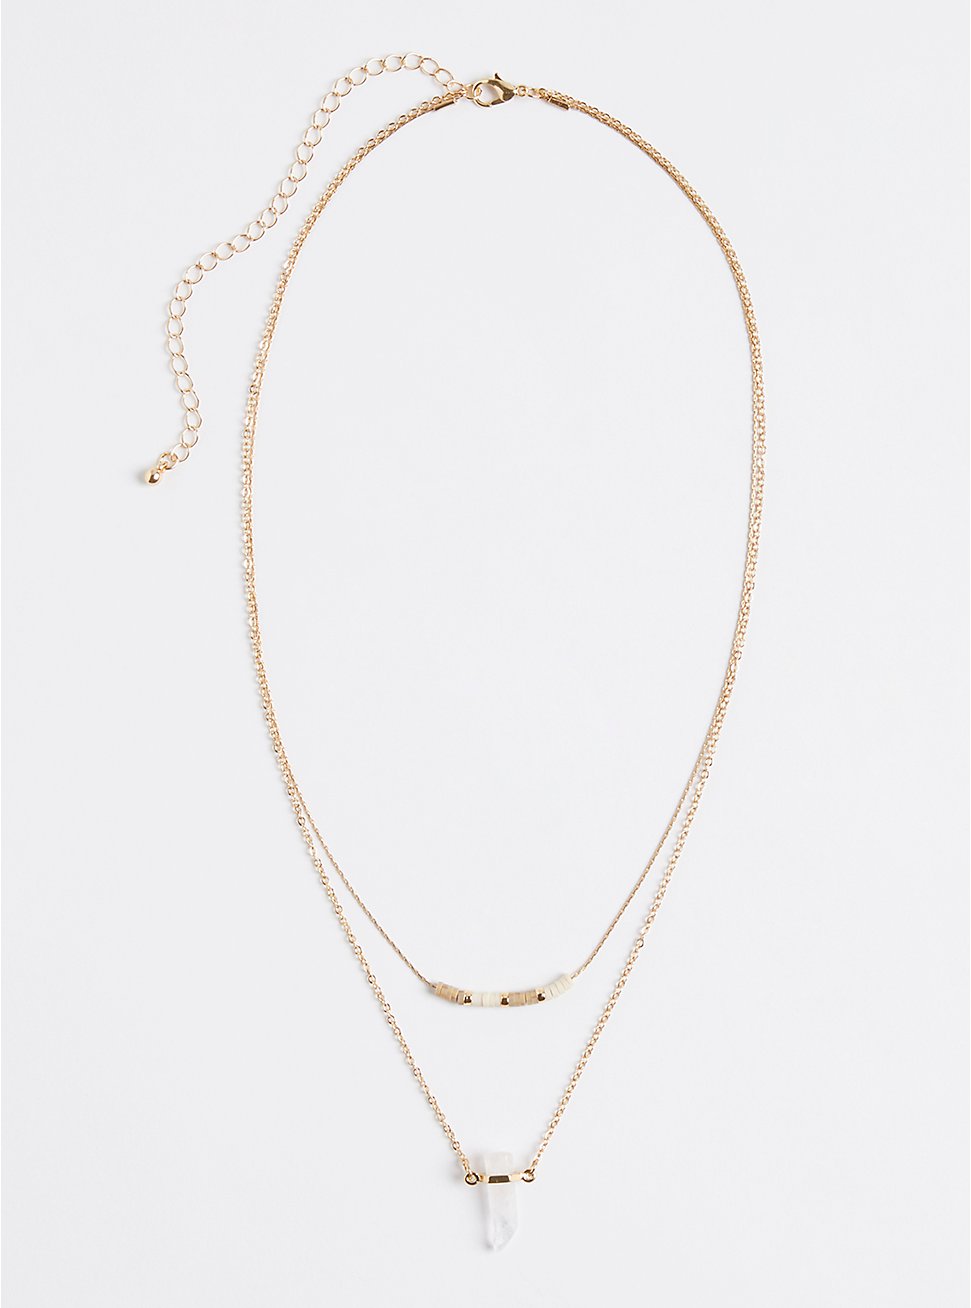 Gold Tone Layered Necklace With Beads And Quartz, , hi-res